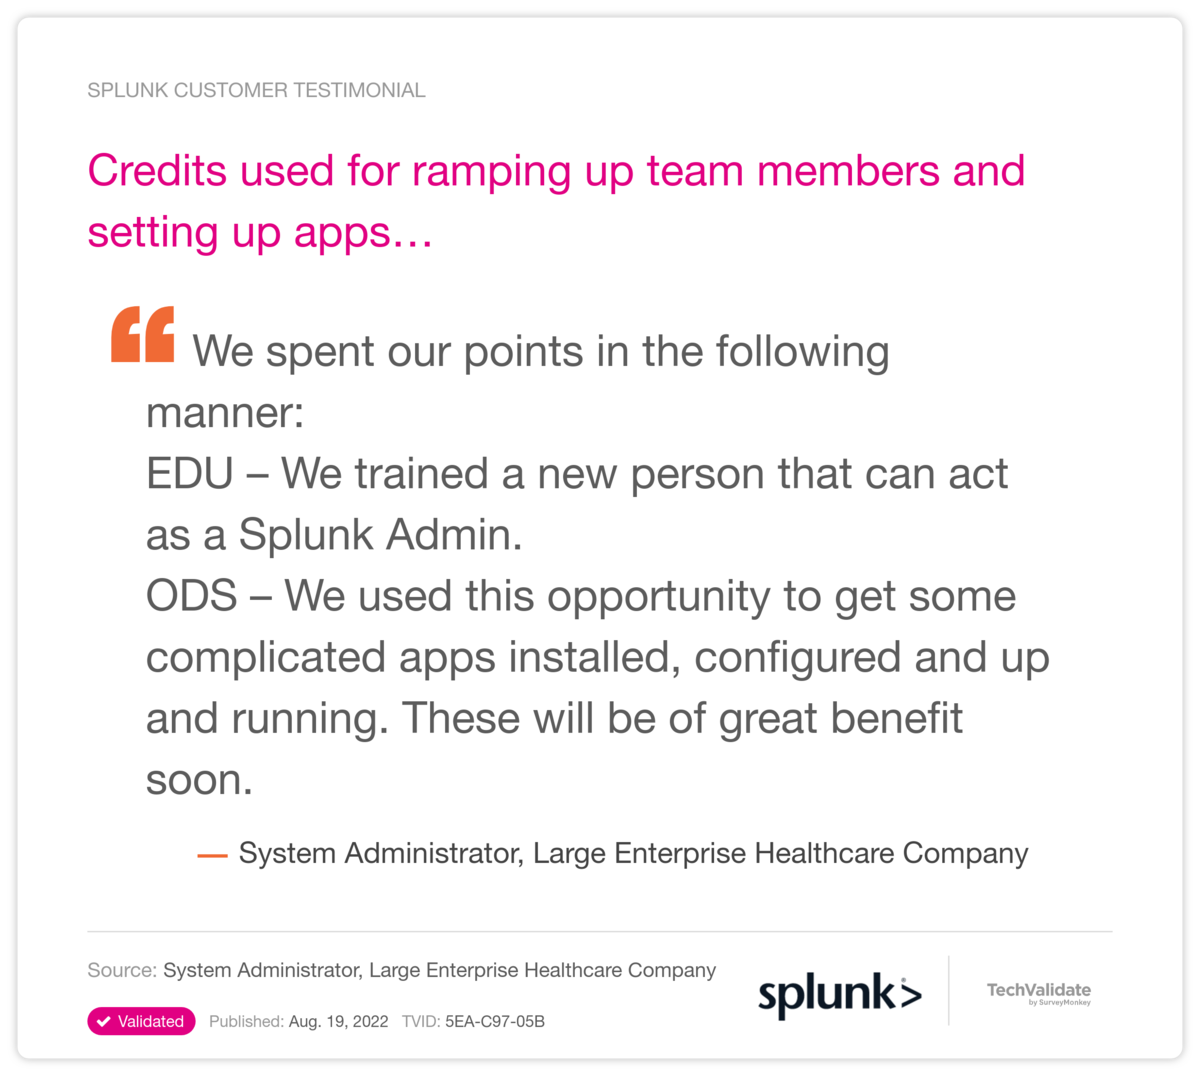 Credits used for ramping up team members and setting up apps...